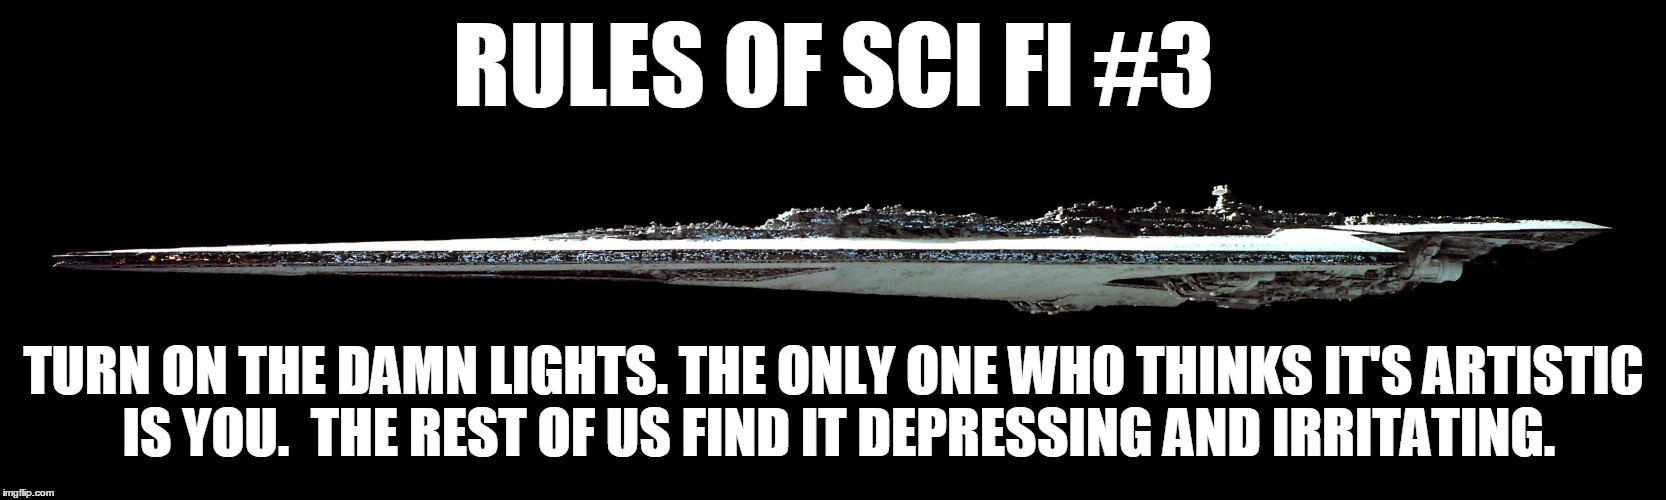 Rules Of Science Fiction #3 | RULES OF SCI FI #3 TURN ON THE DAMN LIGHTS. THE ONLY ONE WHO THINKS IT'S ARTISTIC IS YOU.  THE REST OF US FIND IT DEPRESSING AND IRRITATING. | image tagged in science fiction,new rules | made w/ Imgflip meme maker